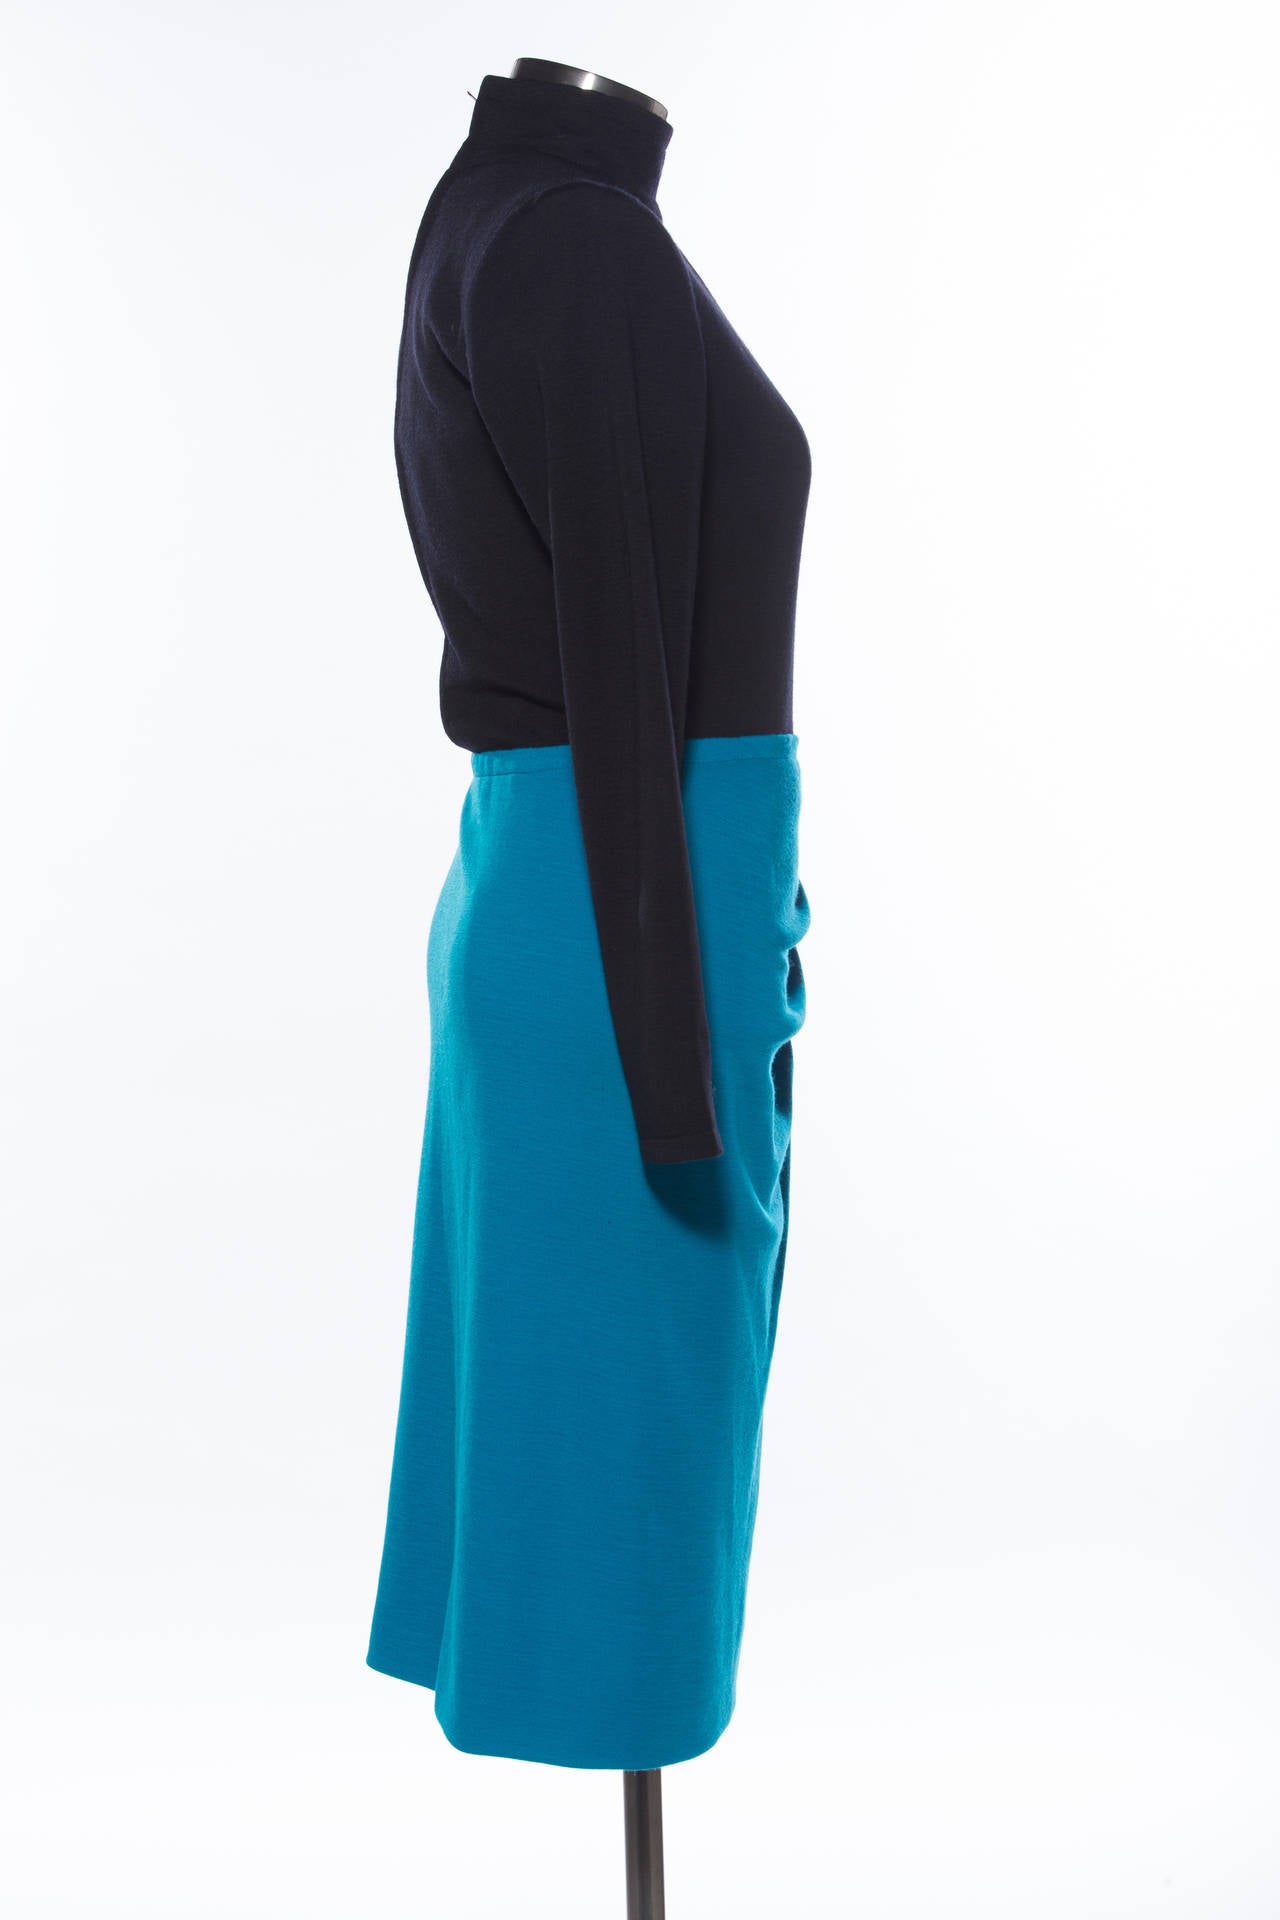 Givenchy Haute Couture circa 1980's wool jersey dress, back zip, double side zip, shoulder pads and fully lined in silk.